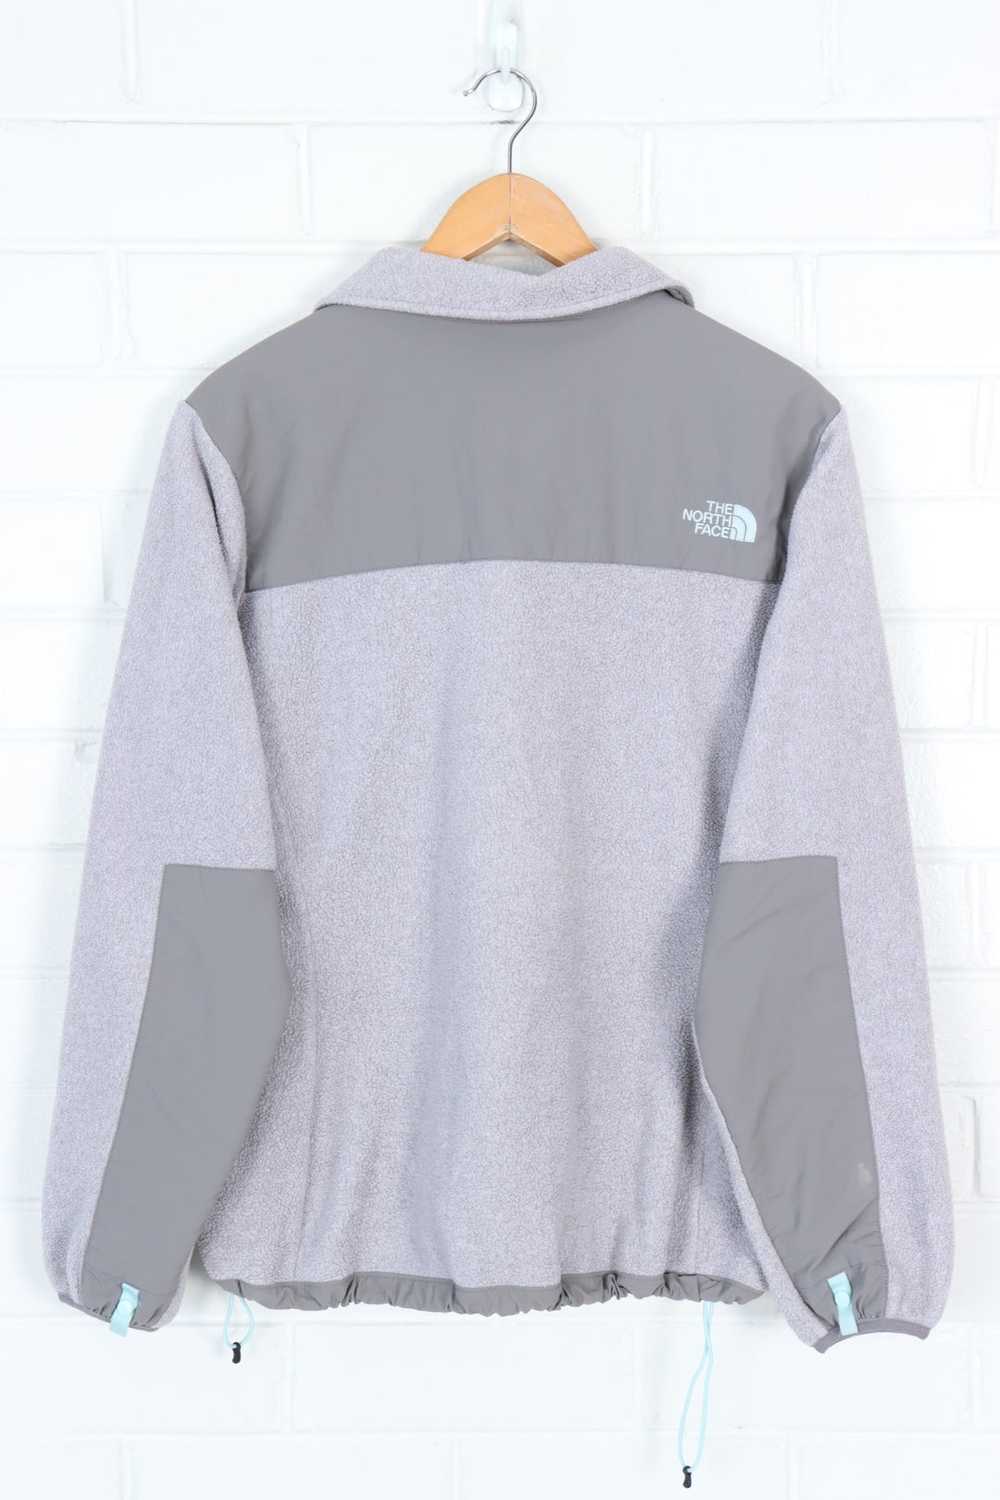 THE NORTH FACE Grey & Teal Panel Fleece Jacket (W… - image 3